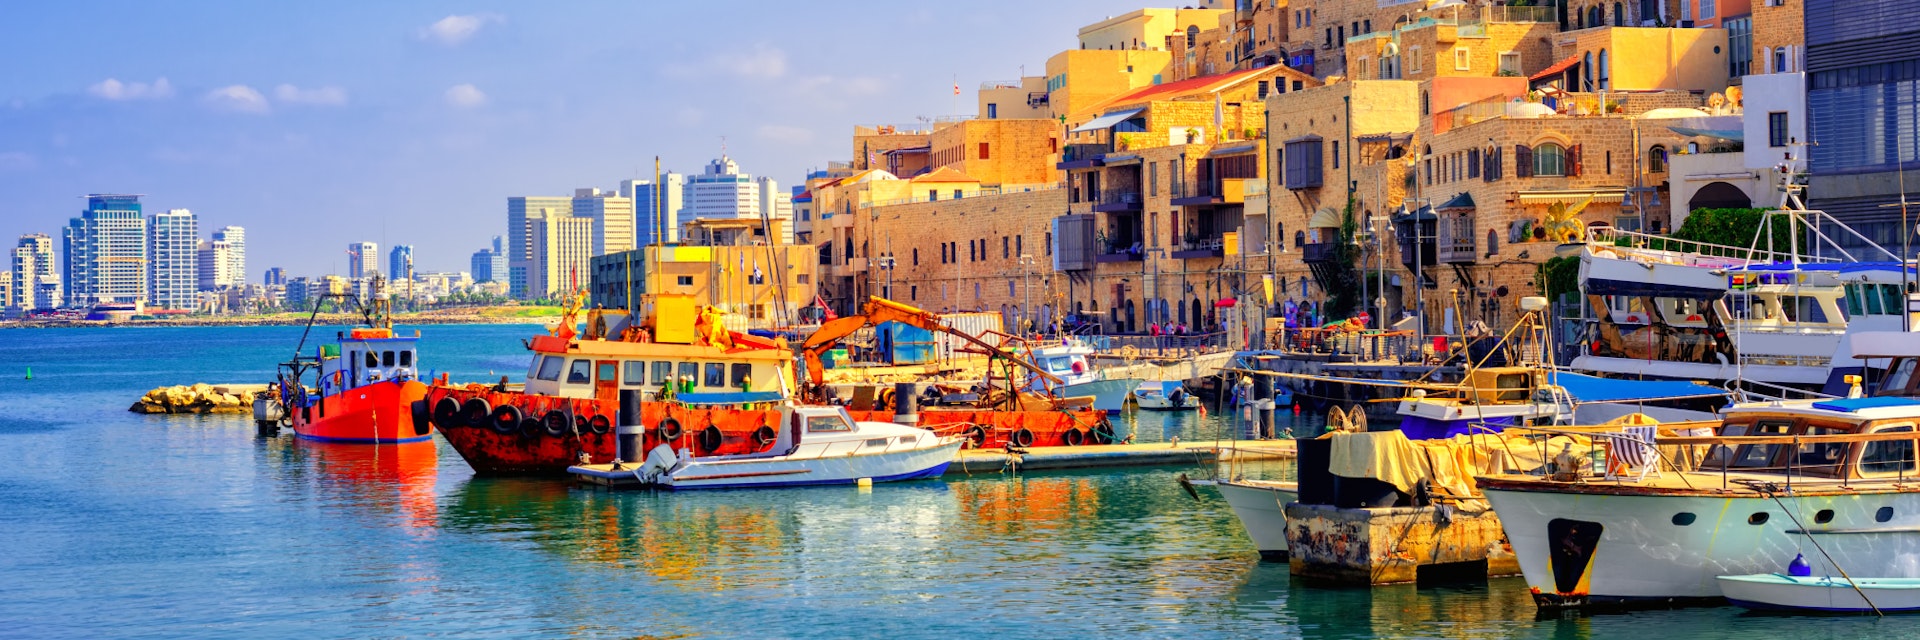 Old town and port of Jaffa and modern skyline of Tel Aviv city, Israel; Shutterstock ID 510846877; Your name (First / Last): Lauren Keith; GL account no.: 65050; Netsuite department name: Online Editorial; Full Product or Project name including edition: Israel Update 2017